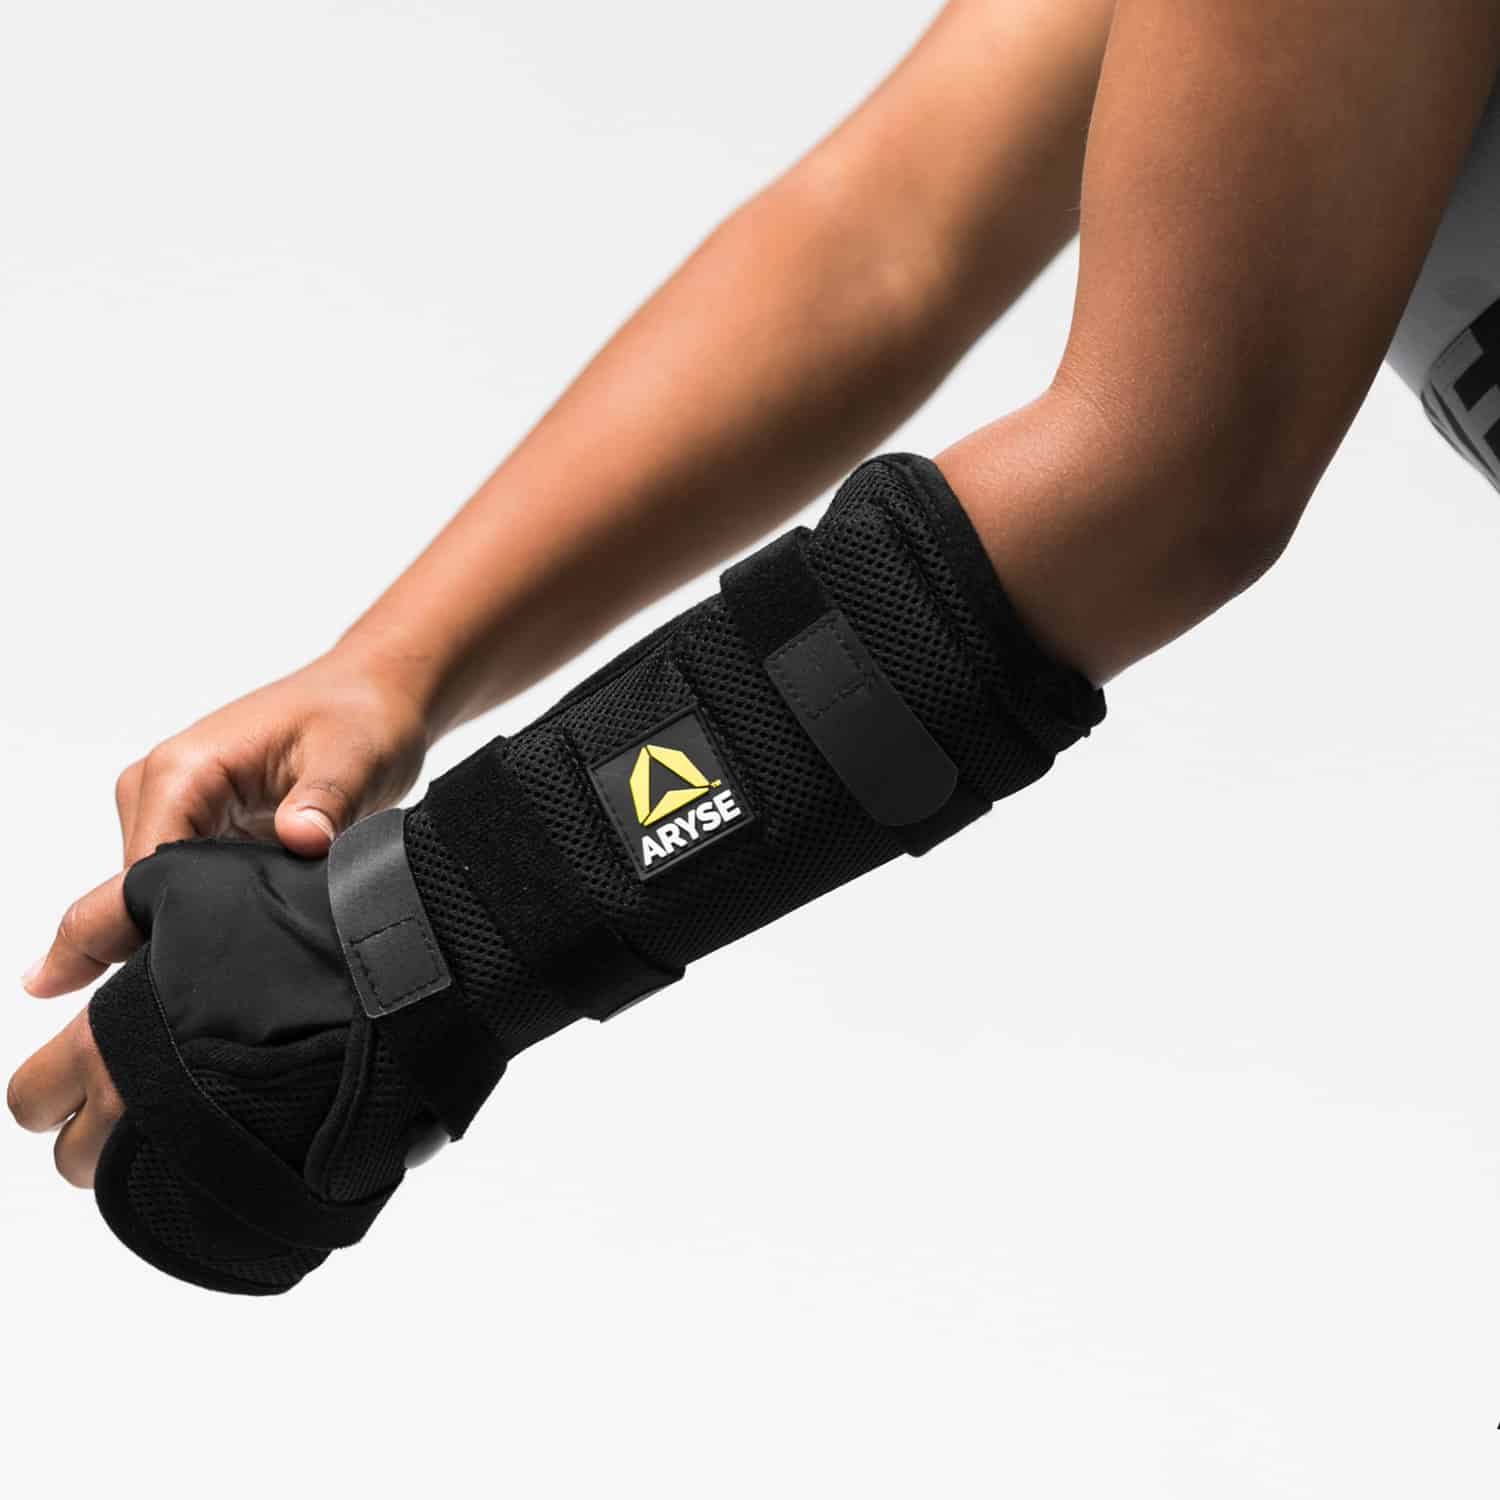 A person wearing a WRIST BRACE purchased from ARTIK Medical Supply.